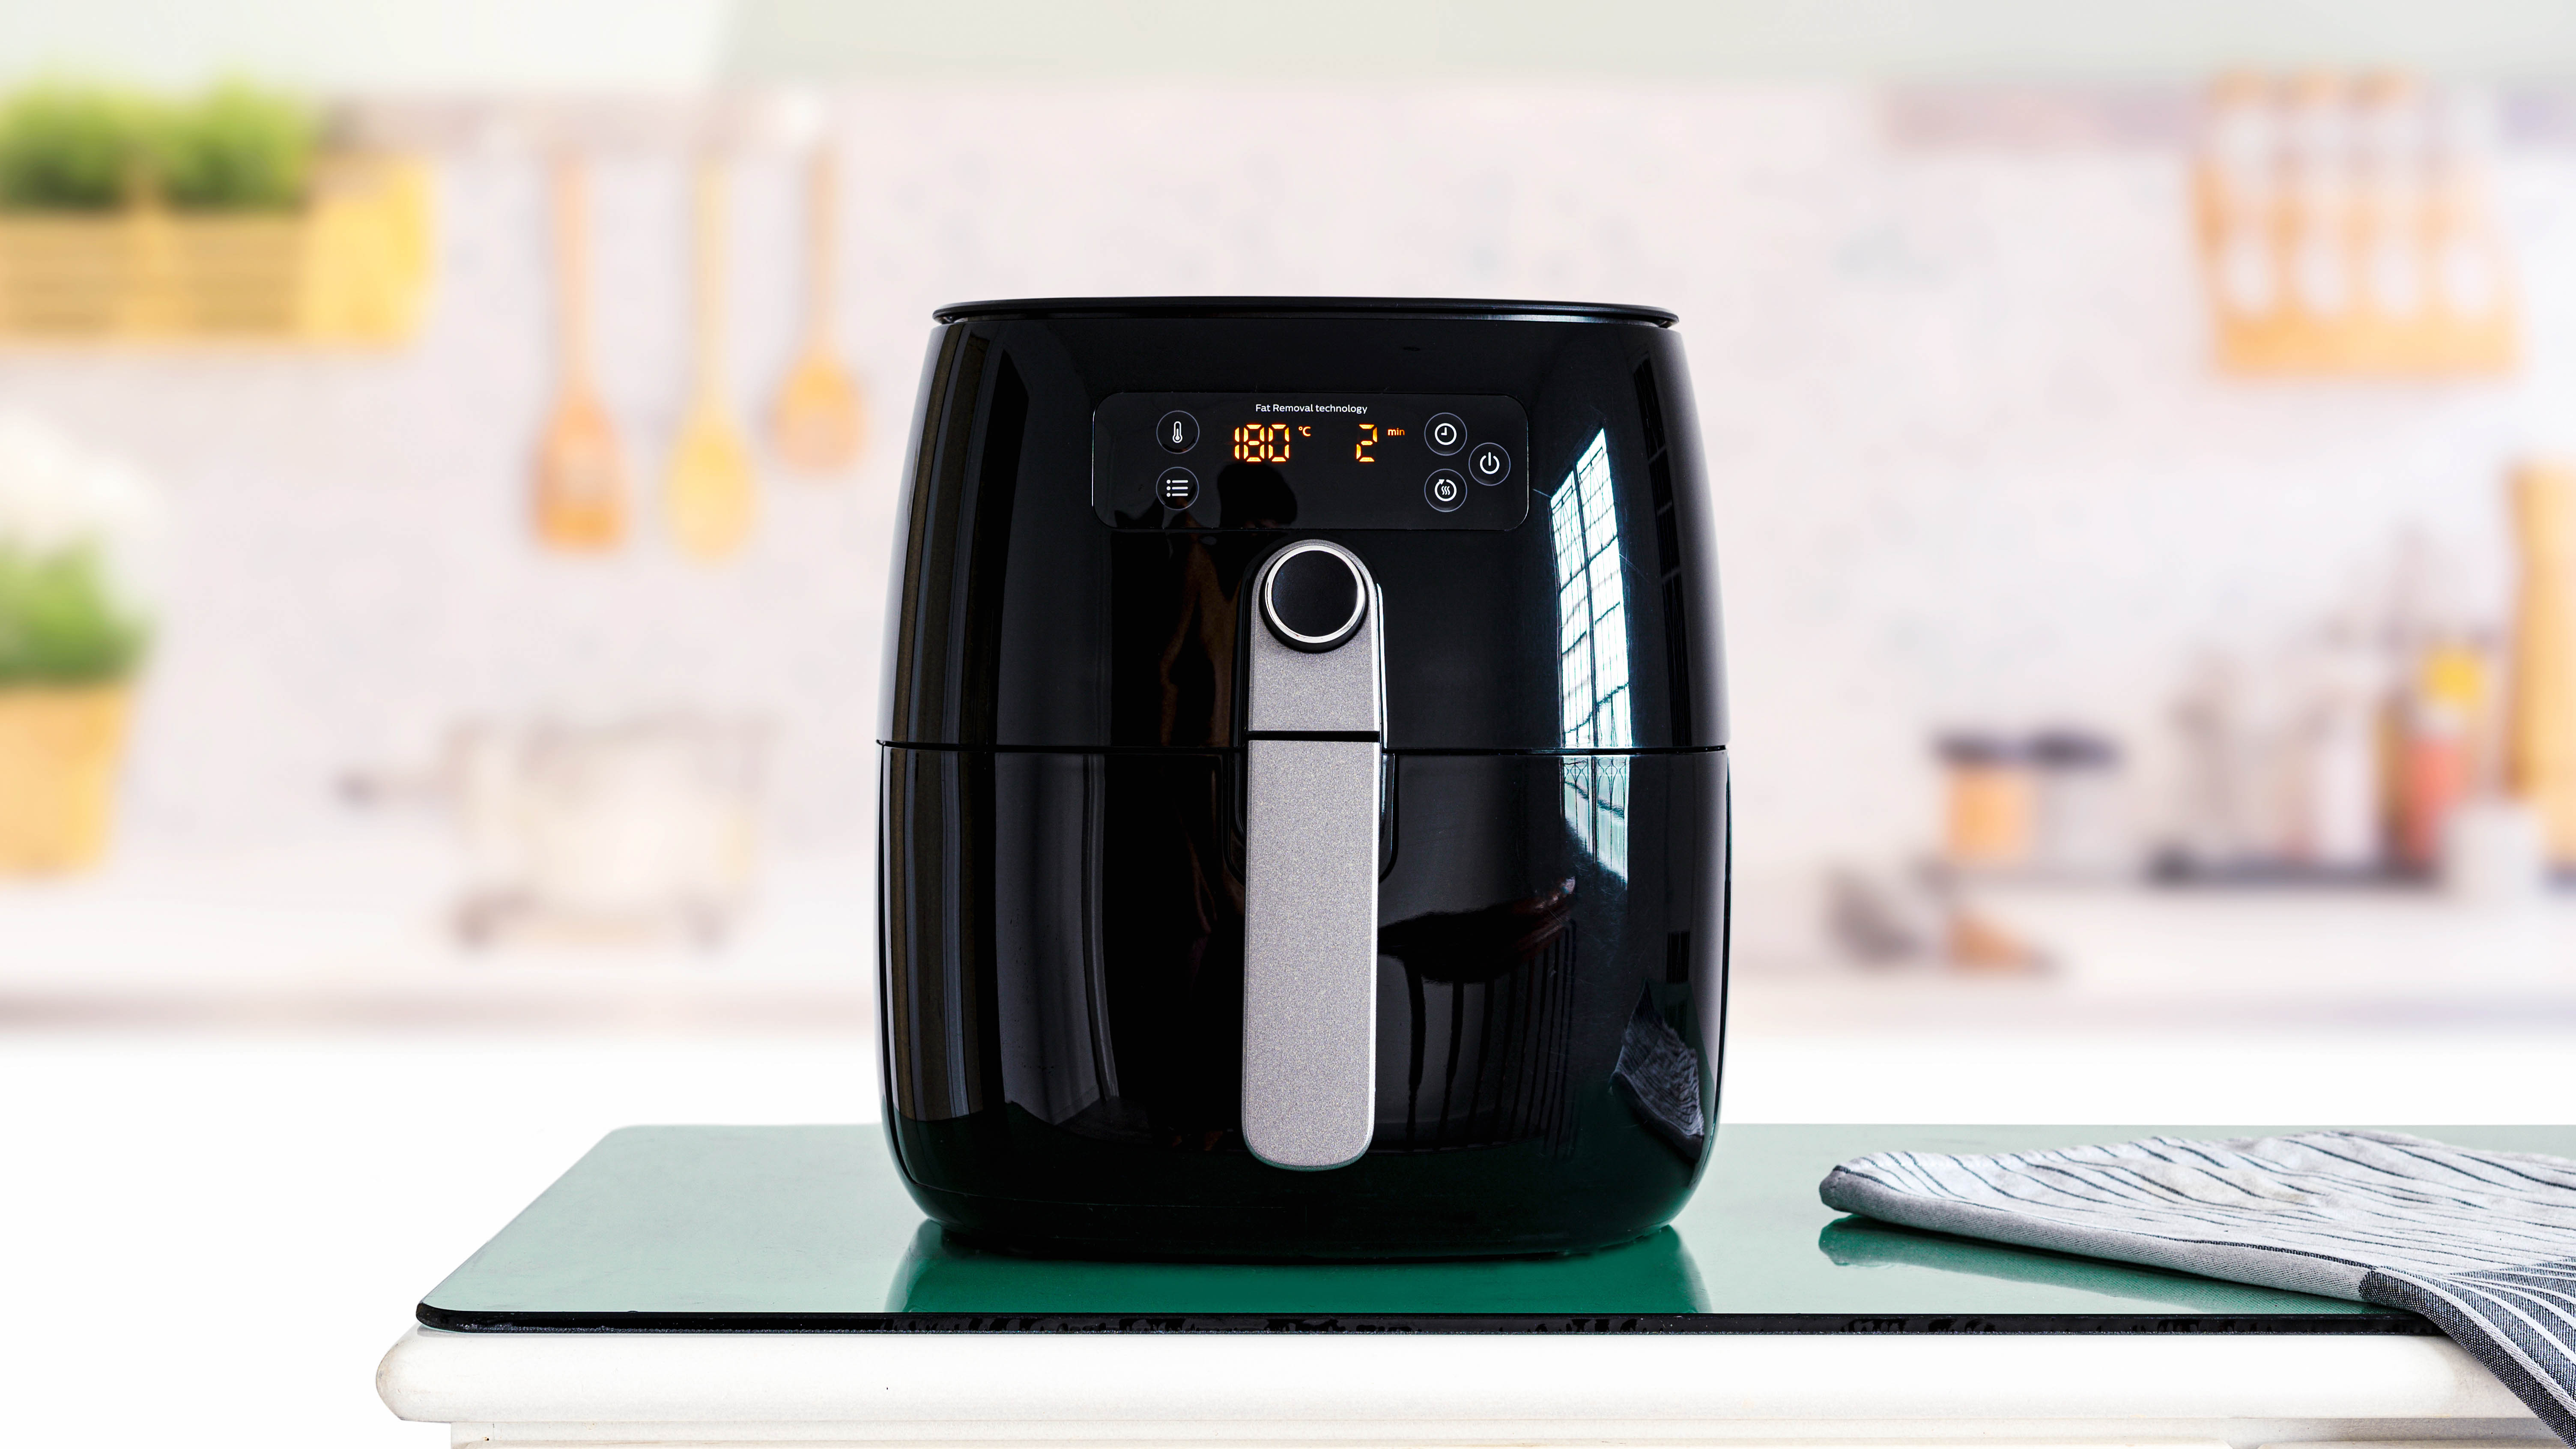 How do you clean a very dirty air fryer? Try this home hack